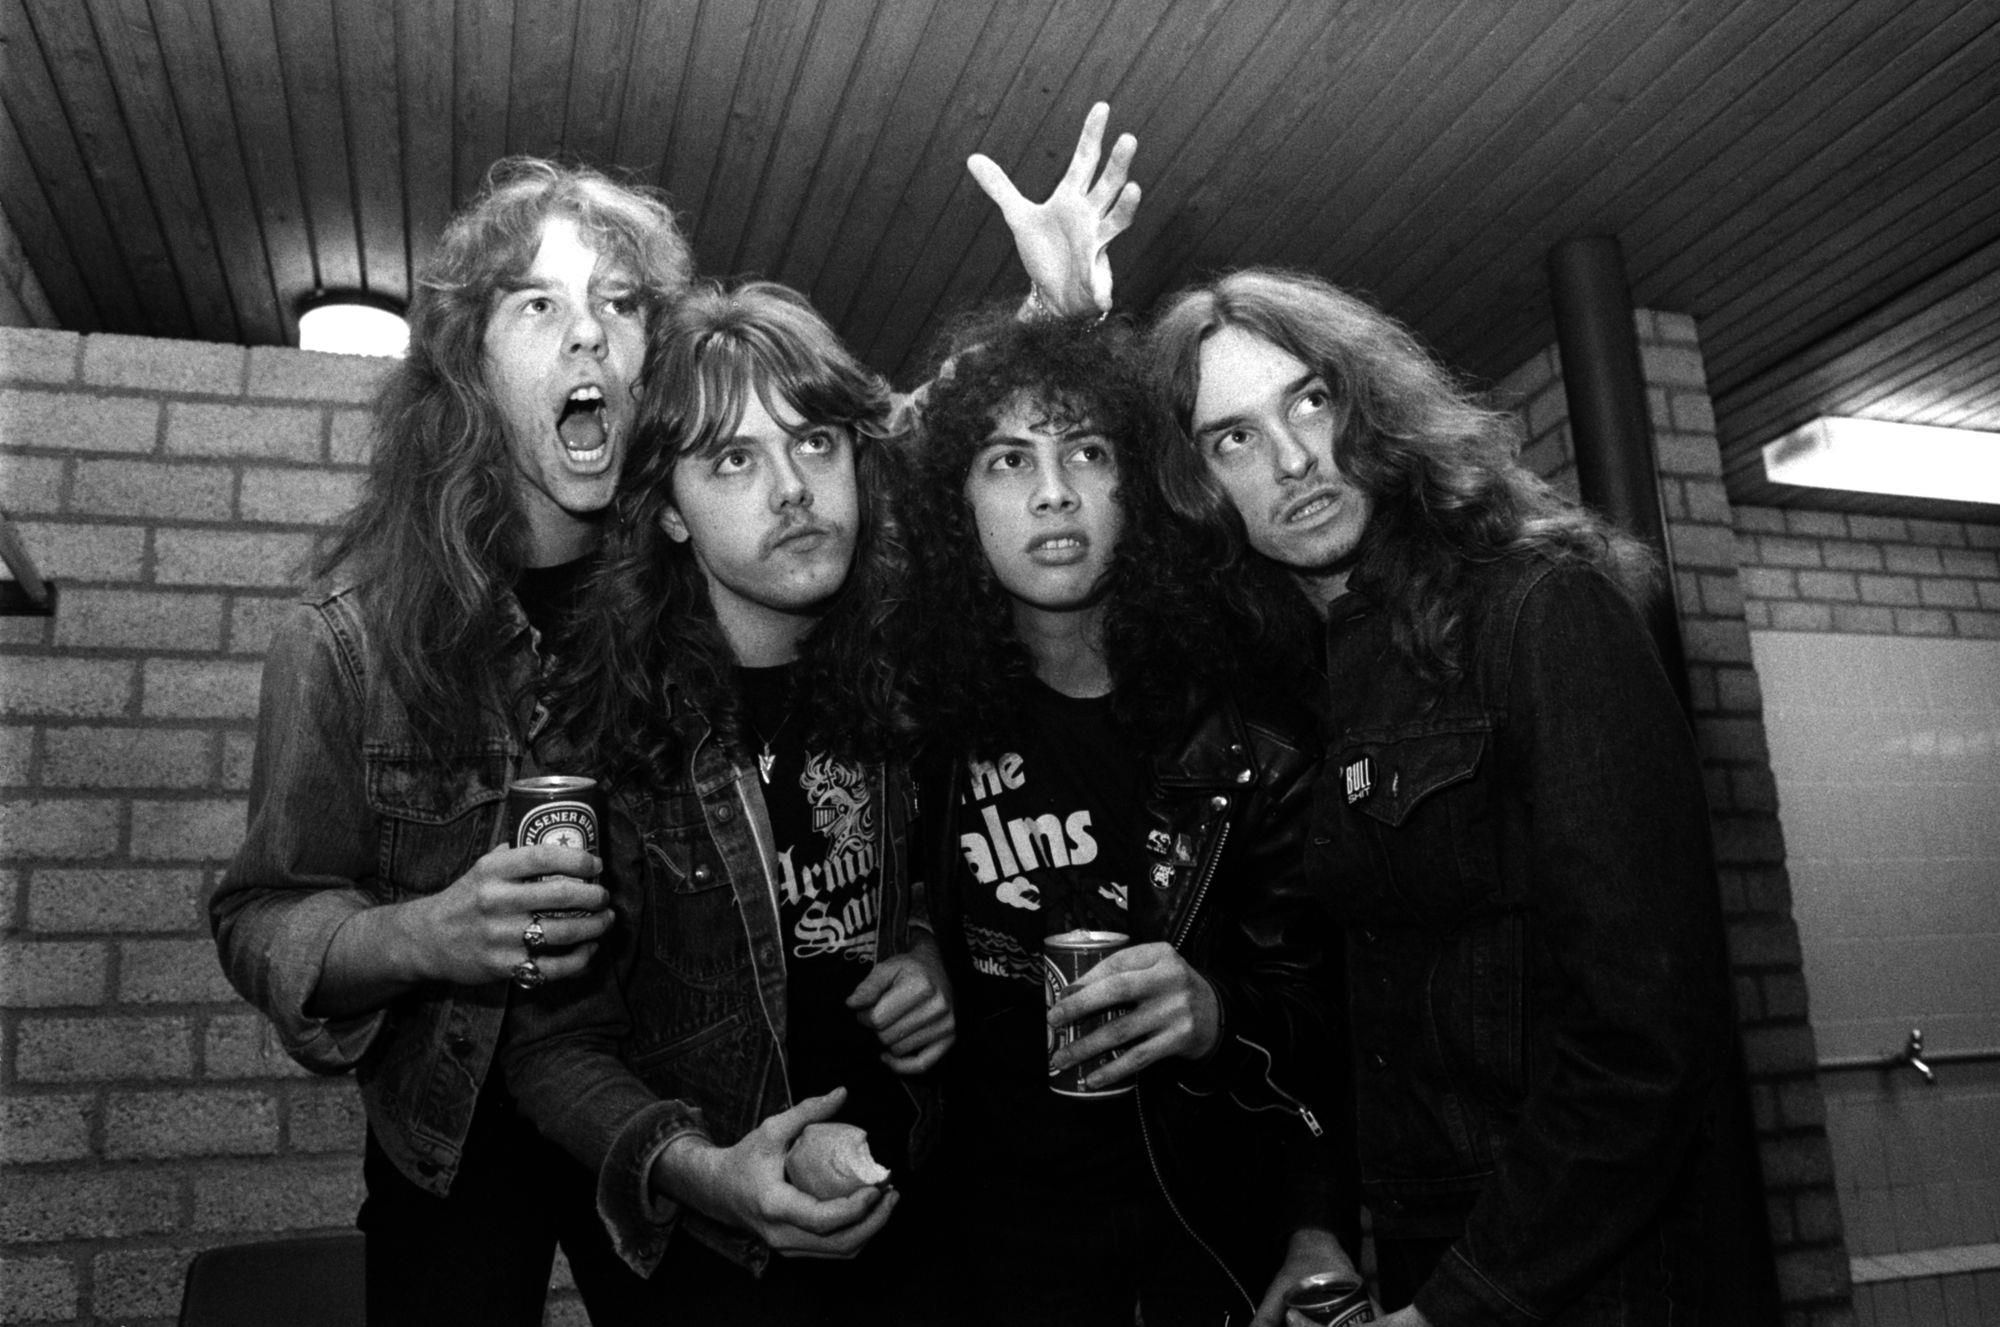 <p>Metallica’s self-titled 1991 album, known to fans as “The Black Album,” was a massive seller upon release and still is today,<a href="https://www.loudersound.com/features/metallica-album-sales-us"> selling 30 million copies worldwide</a>. It's ridiculously long, clocking in at over an hour, and some of the songs are entirely forgettable. The years have not been kind to this record, and if you haven’t heard it some time, go back and listen to “Enter Sandman.” It’s boring and goes on forever!</p>